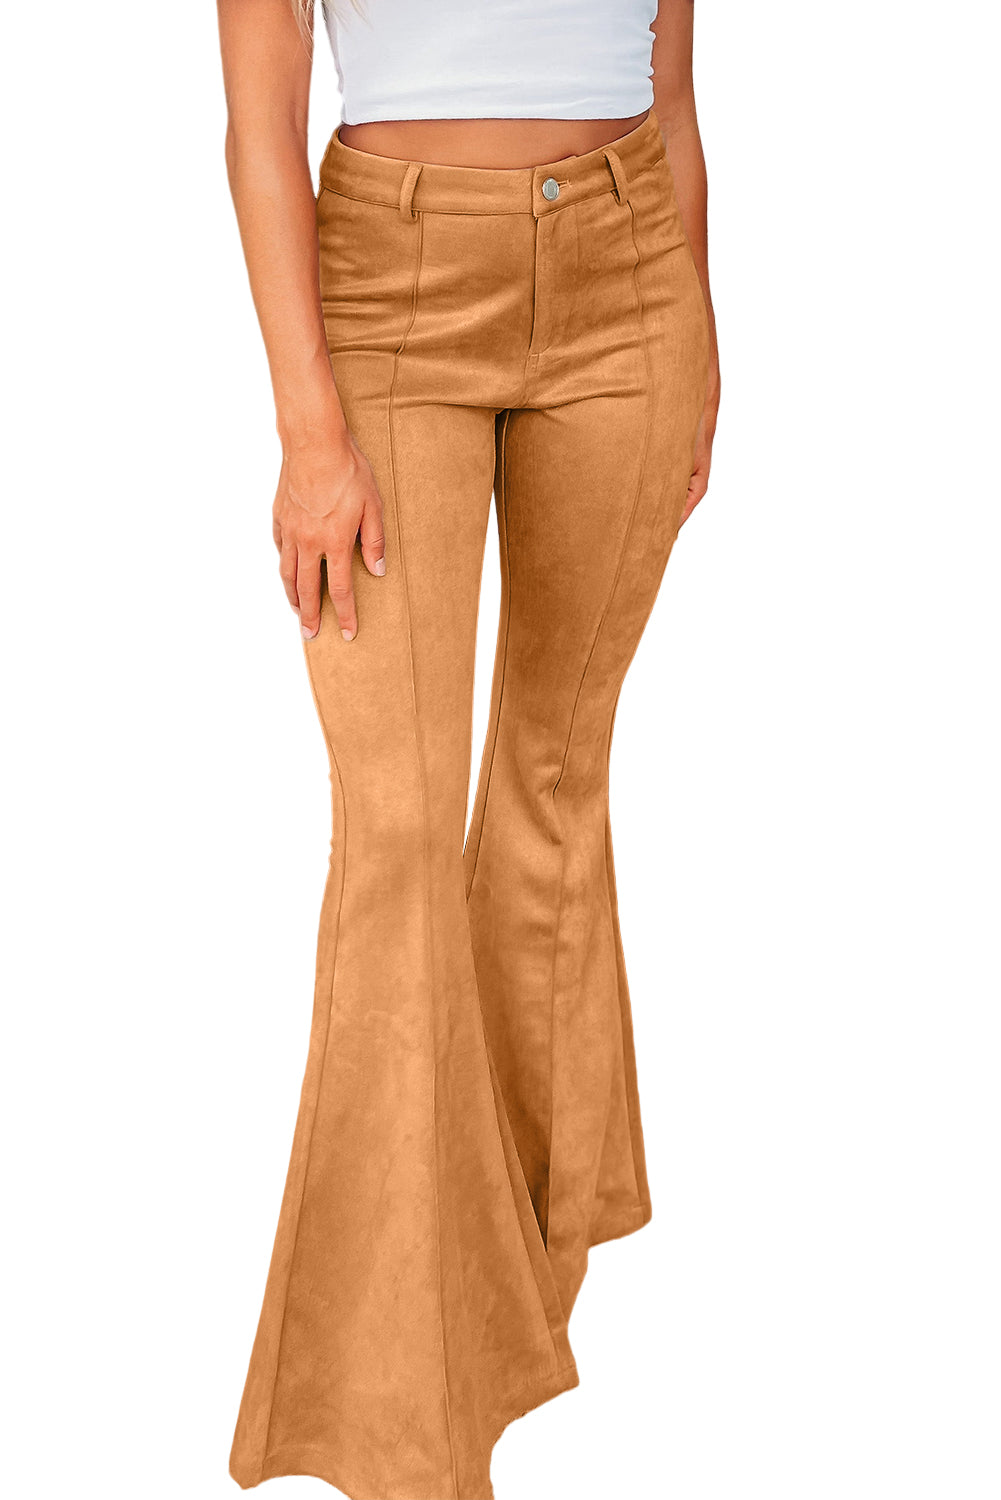 Brown Exposed Seam Flare Suede Pants with Pockets